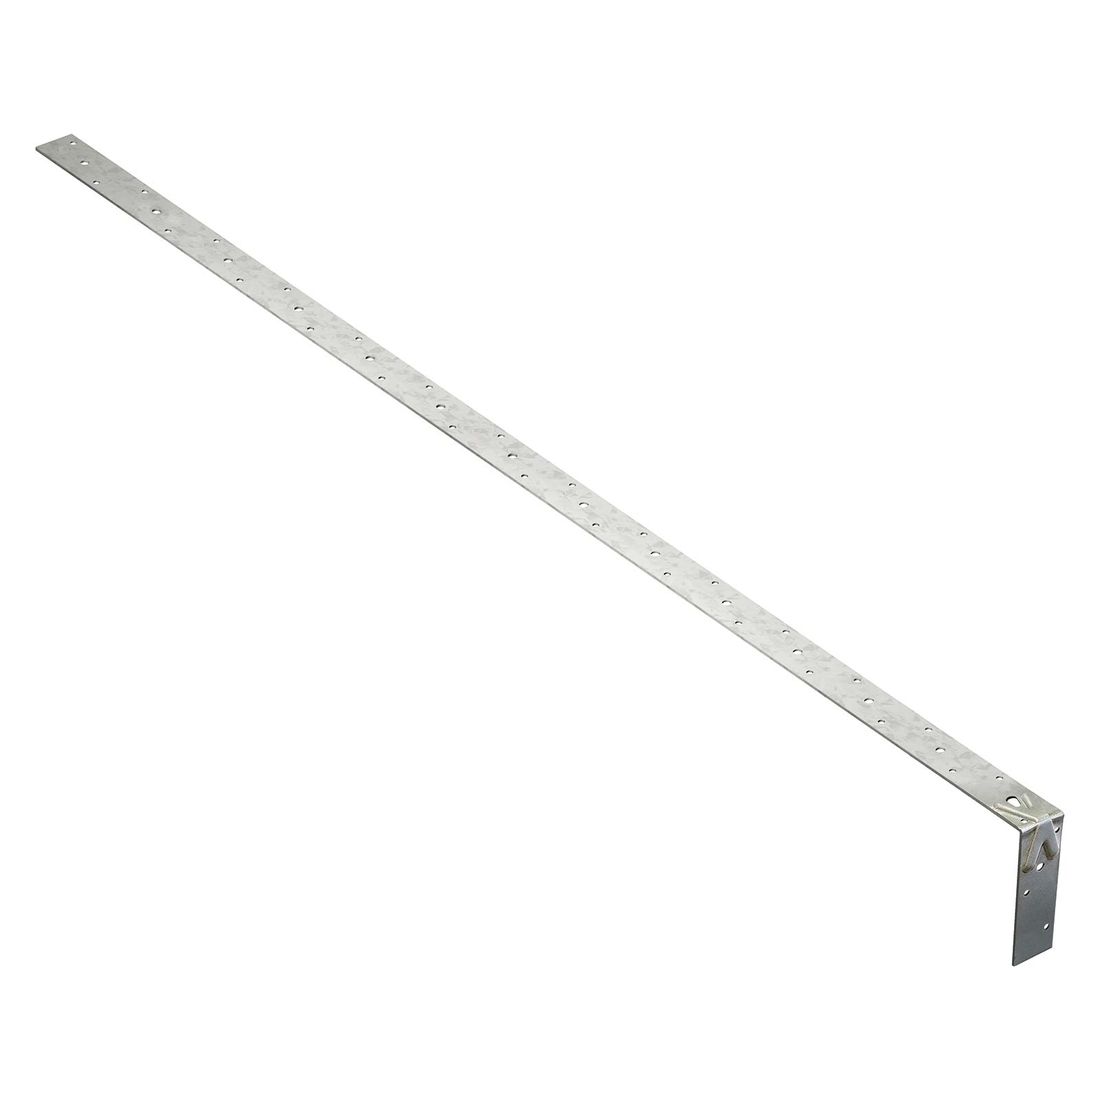 Engineered Strap Heavy Duty 1200Mm Overall Bent 100Mm